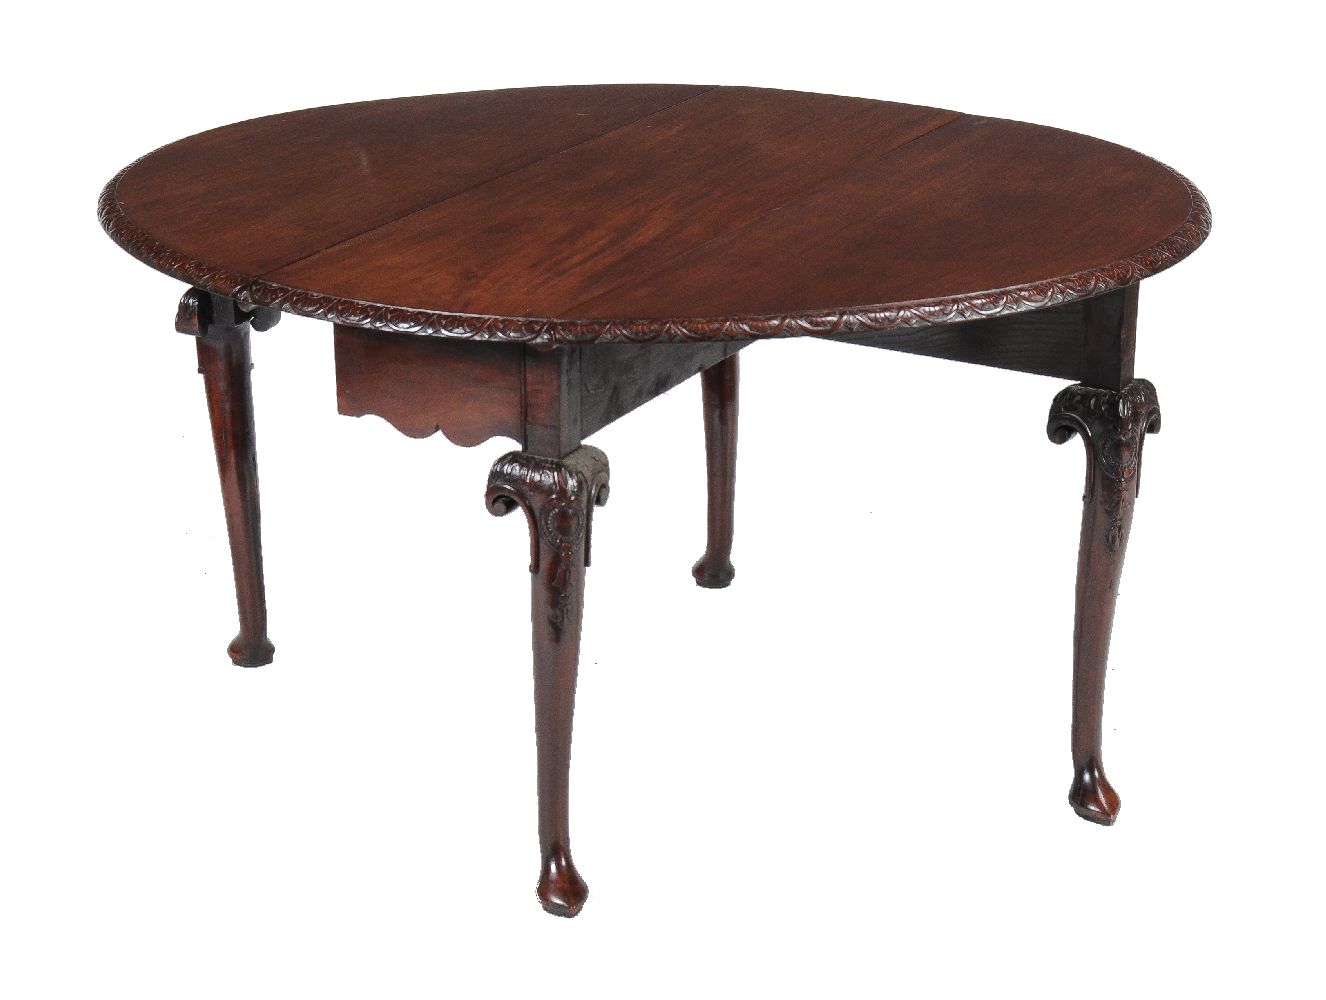 A mahogany drop leaf table in George II style, 19th century, 72cm high, the top 123cm x 139cm (